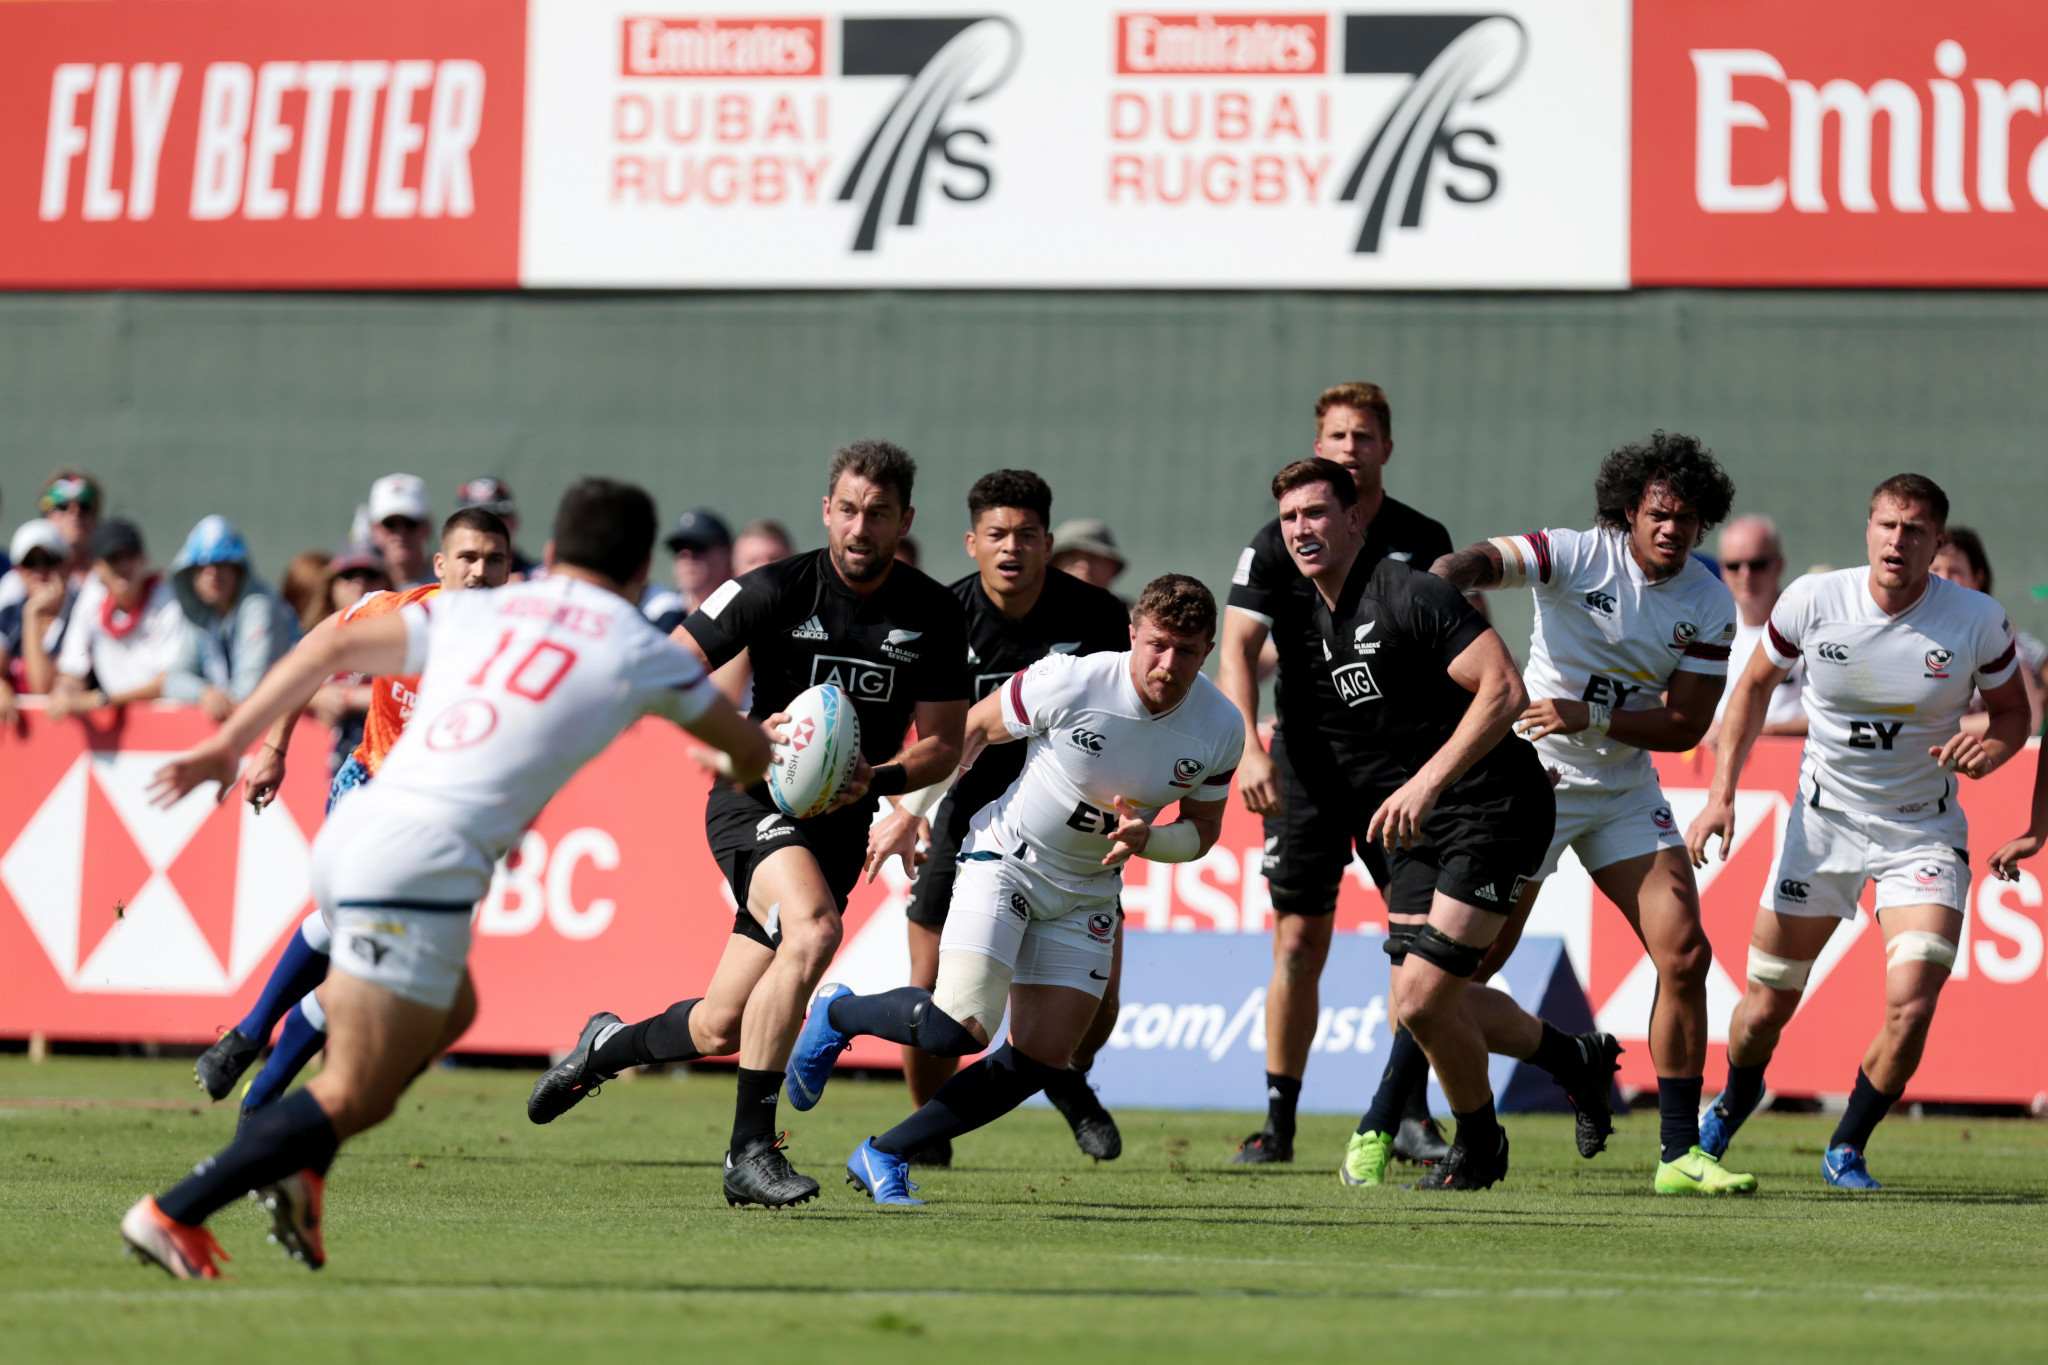 The 2022 HSBC World Rugby Sevens Series is due to open with back-to-back events in Dubai in November ©Getty Images